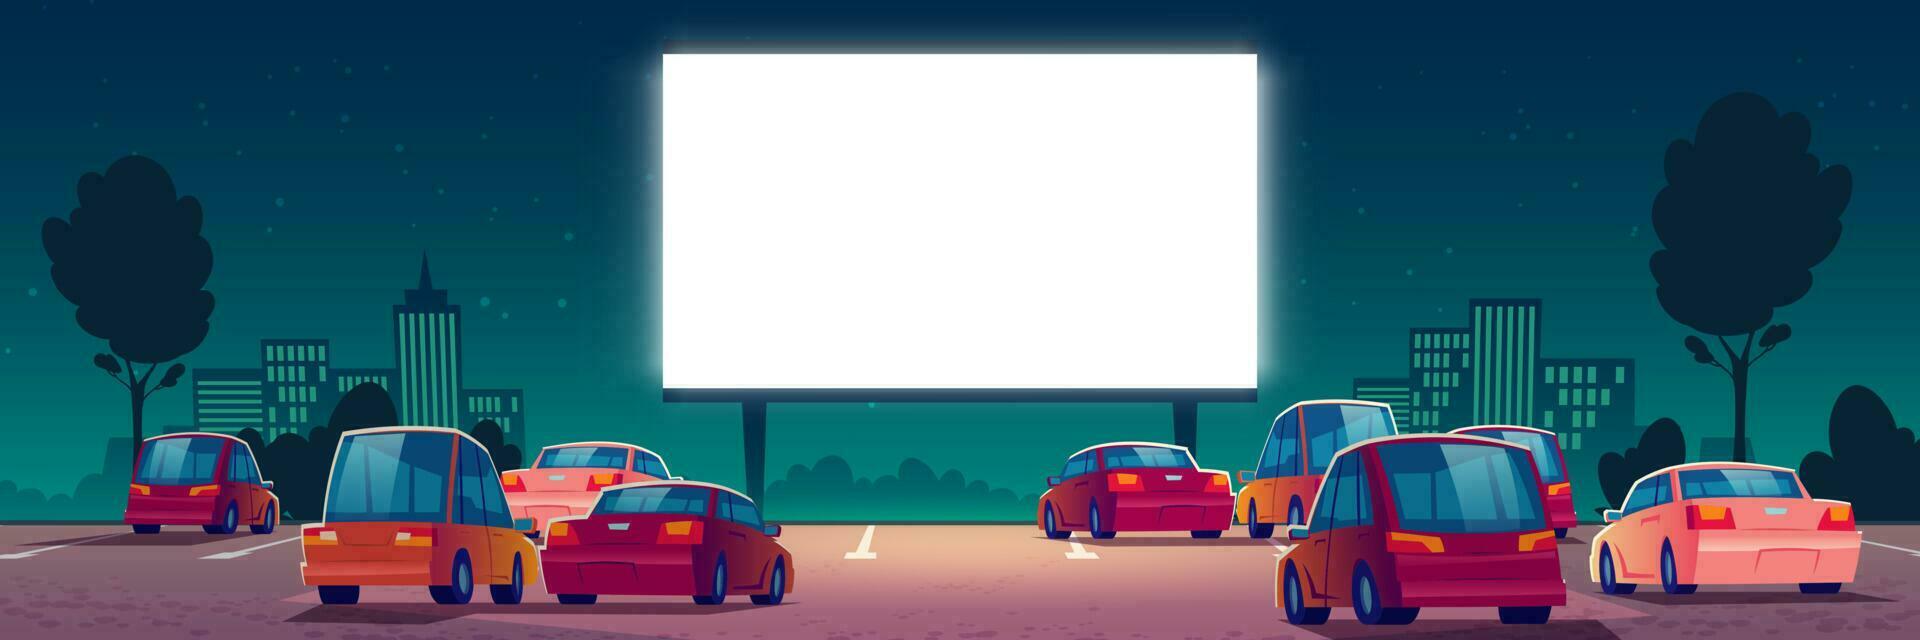 Outdoor cinema, drive-in movie theater with cars vector